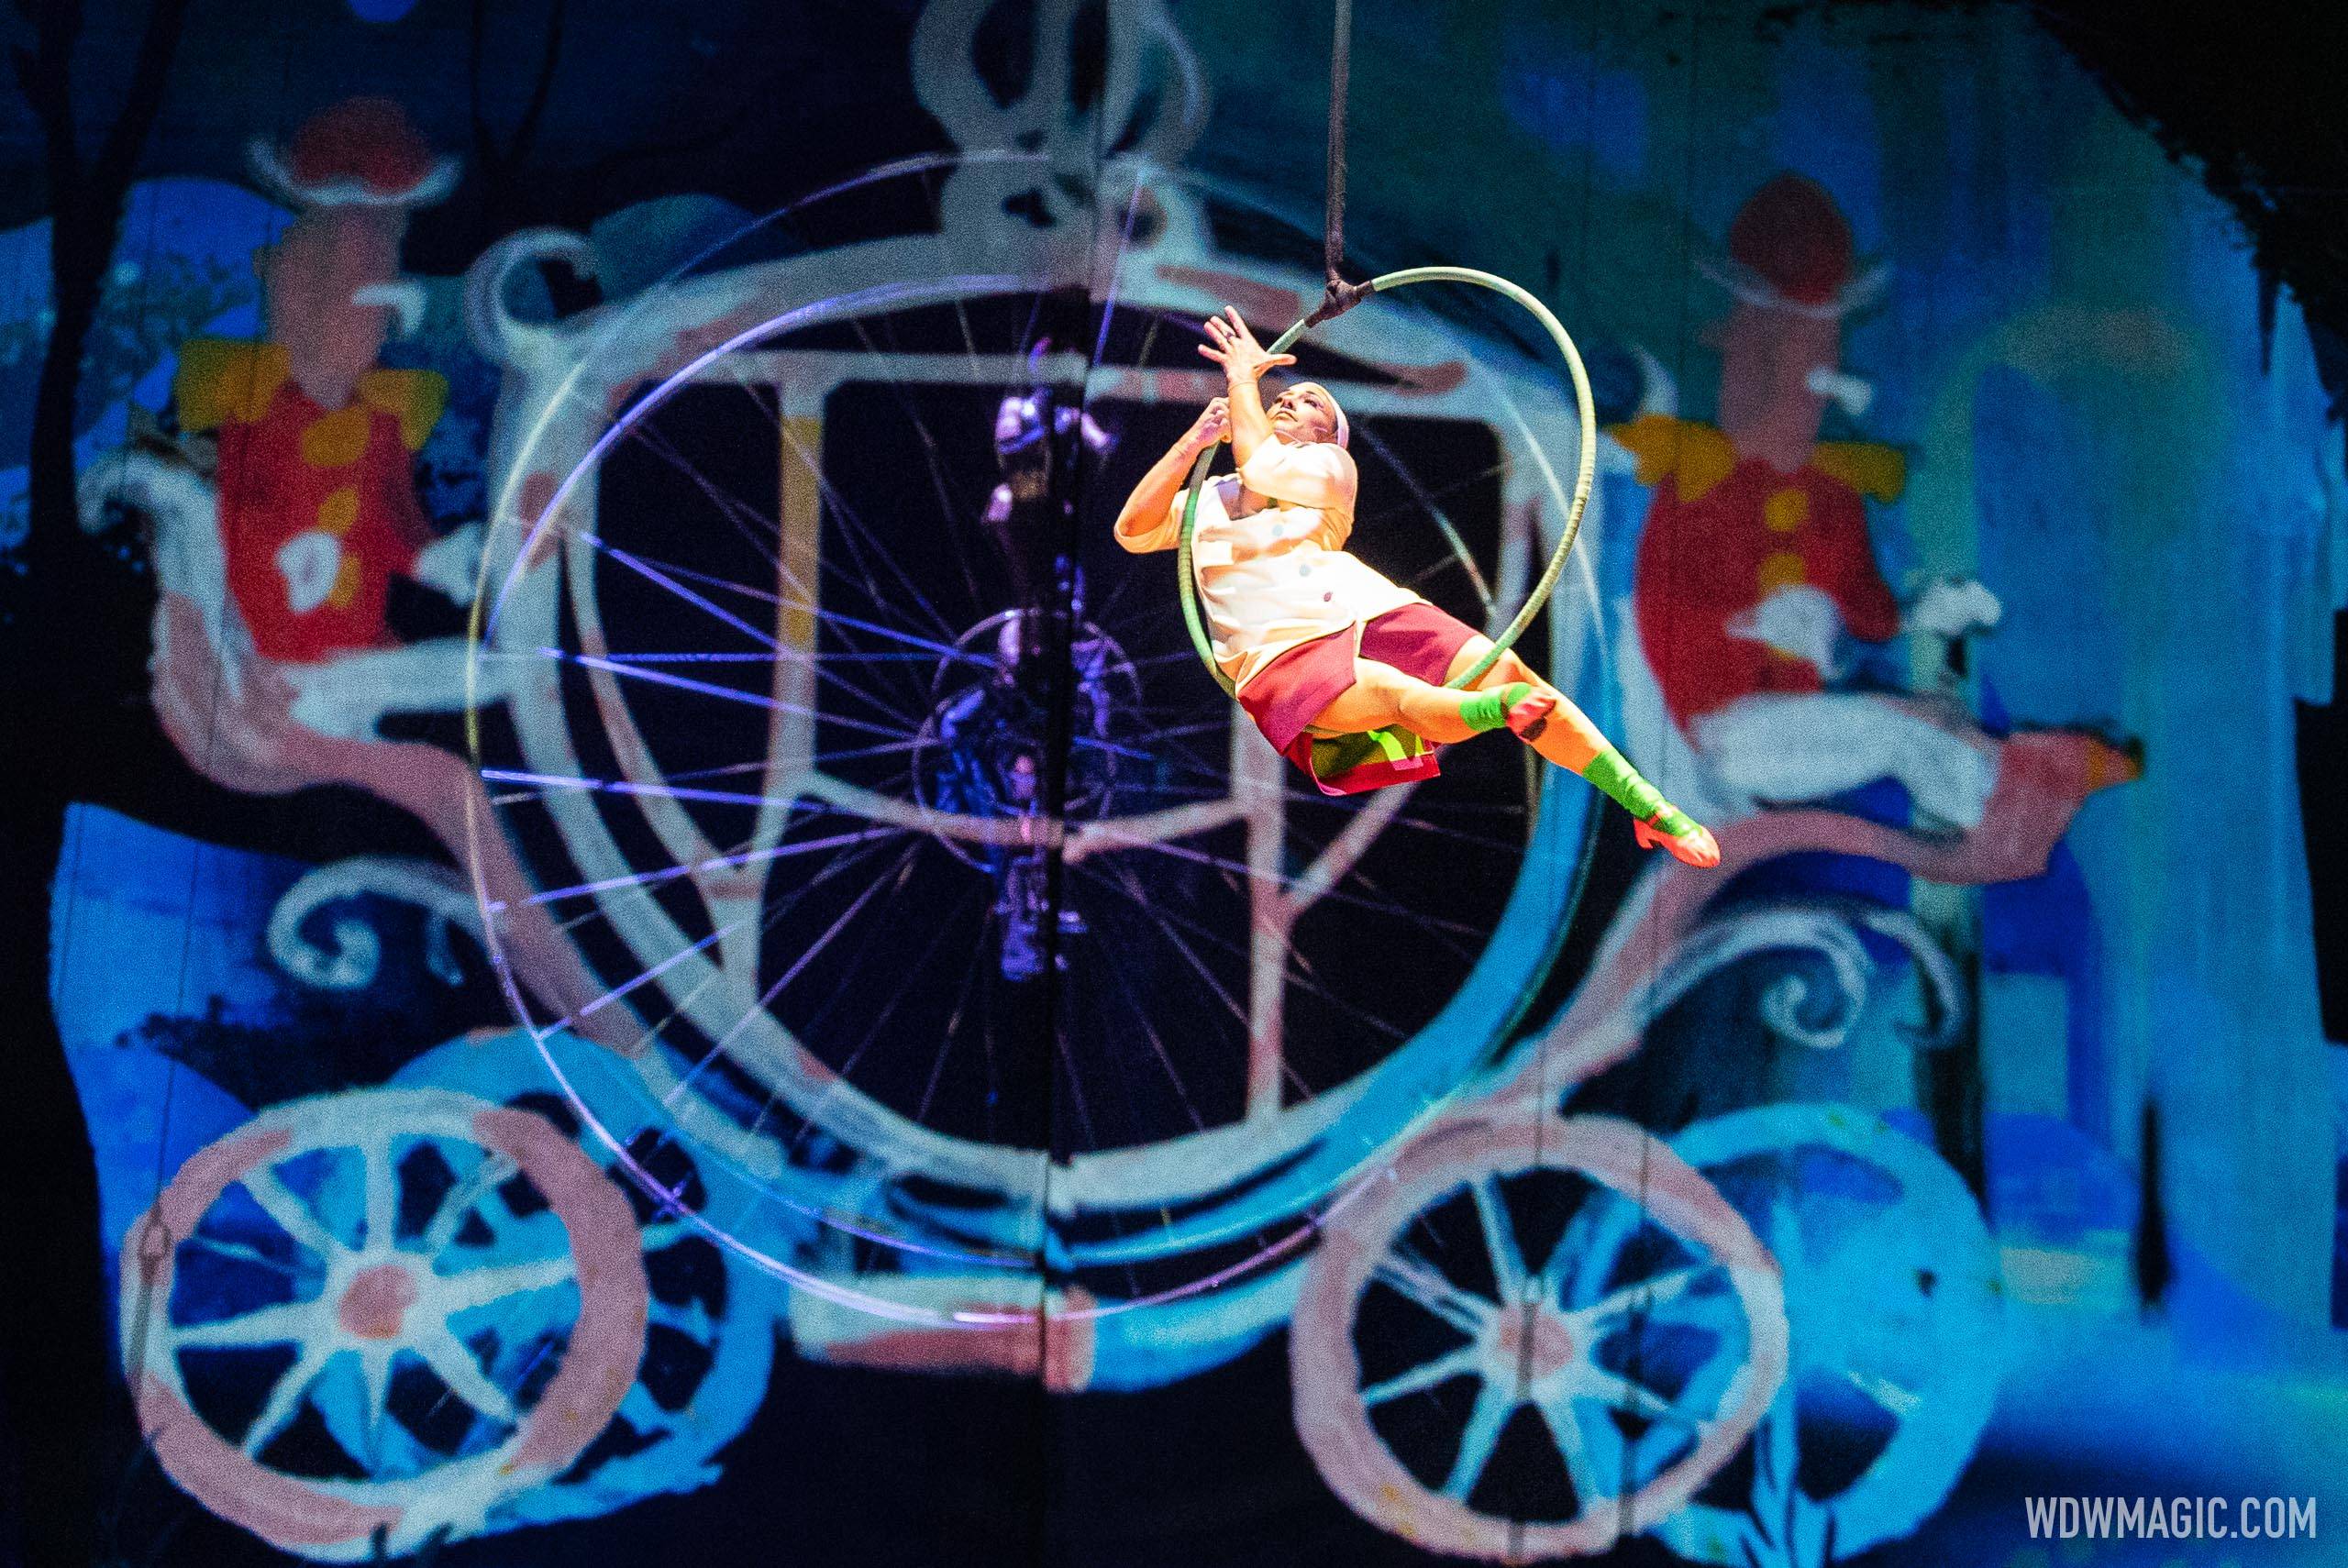 New acts join Cirque du Soleil Drawn to Life